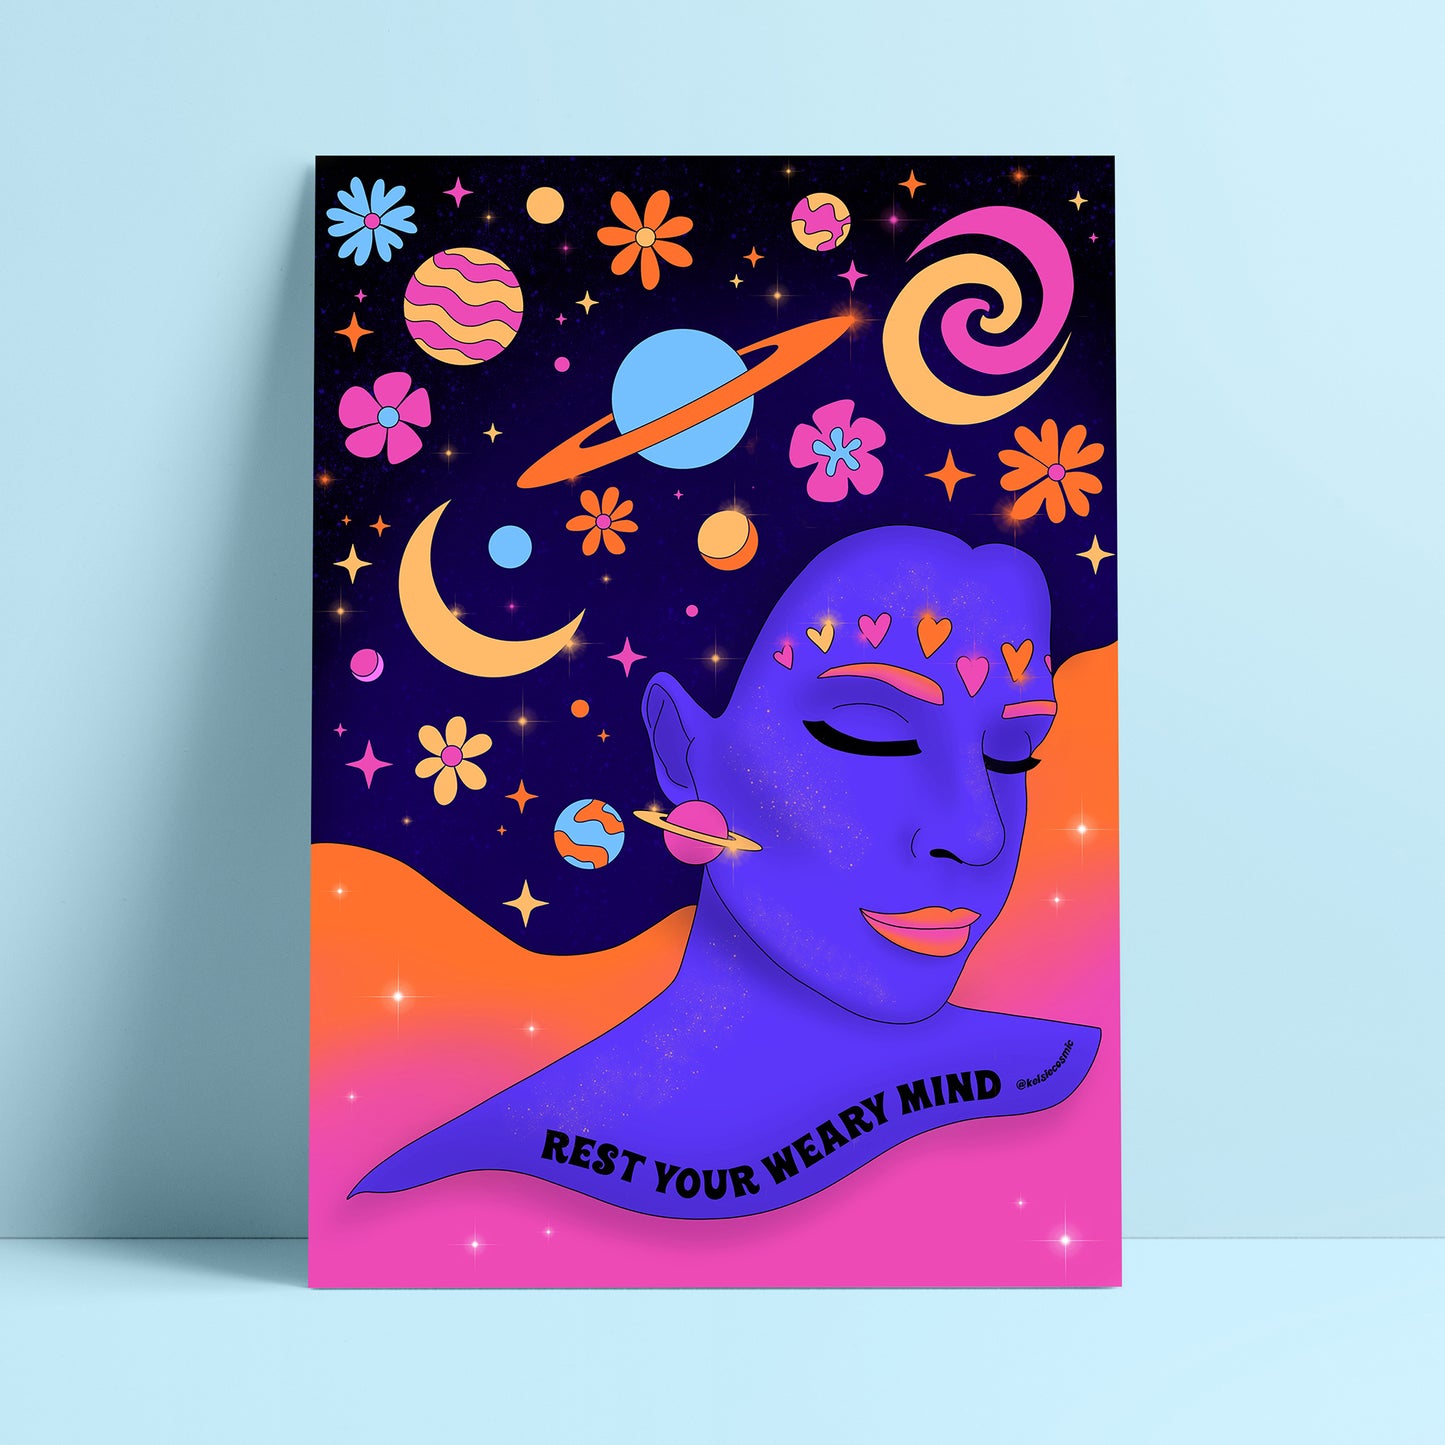 Rest your Weary Mind Art Print